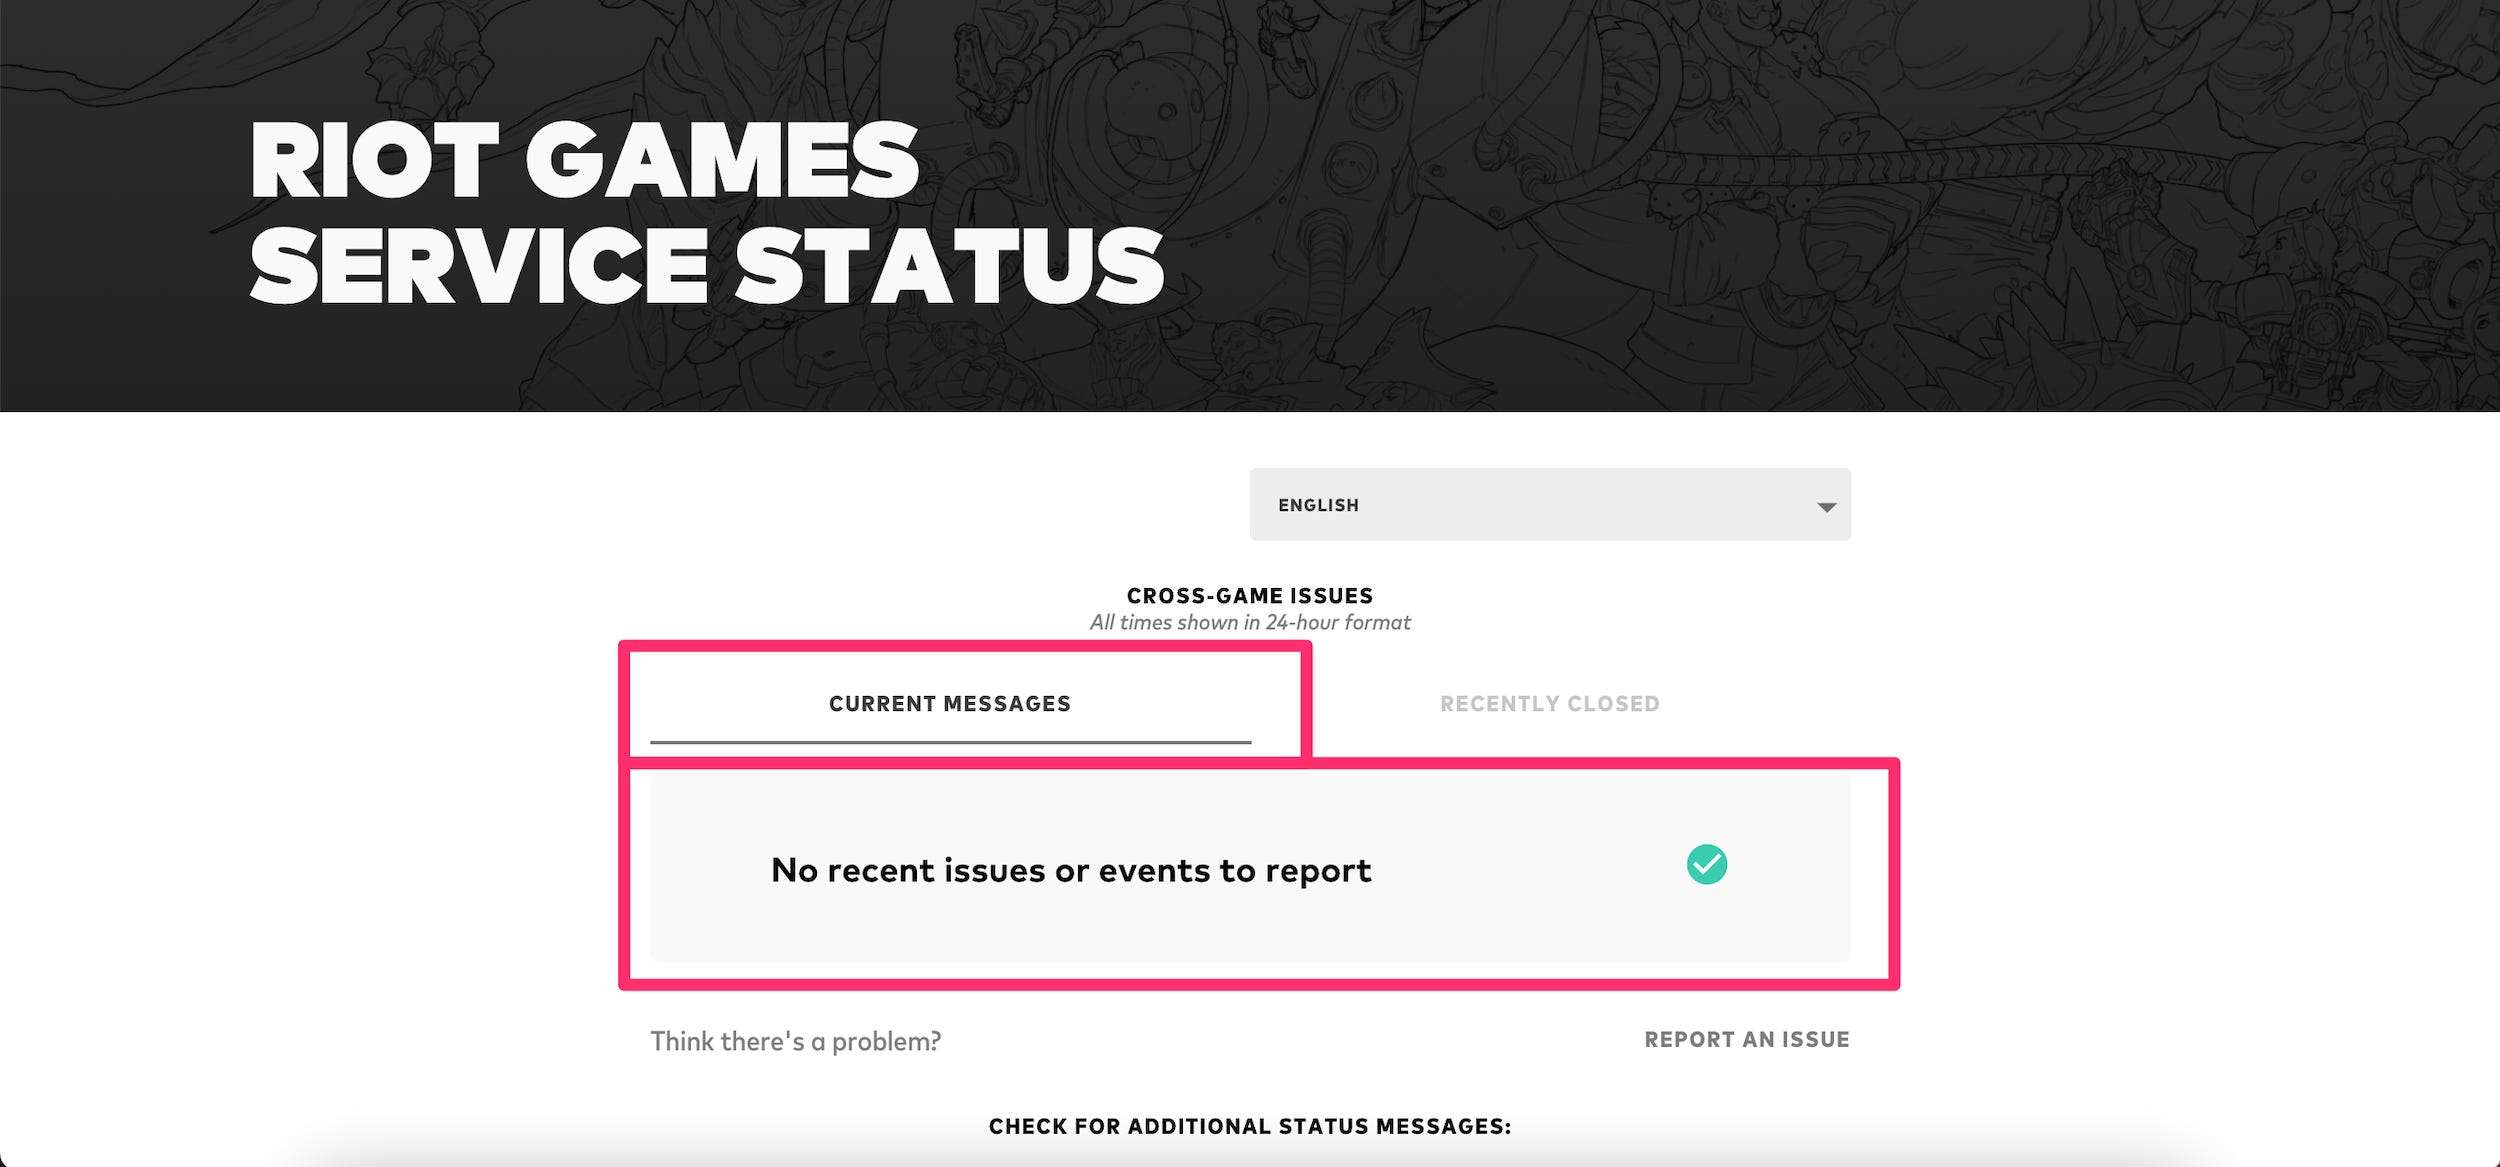 Are Riot Games Servers Down? How to Check Riot Games Server Status? - News